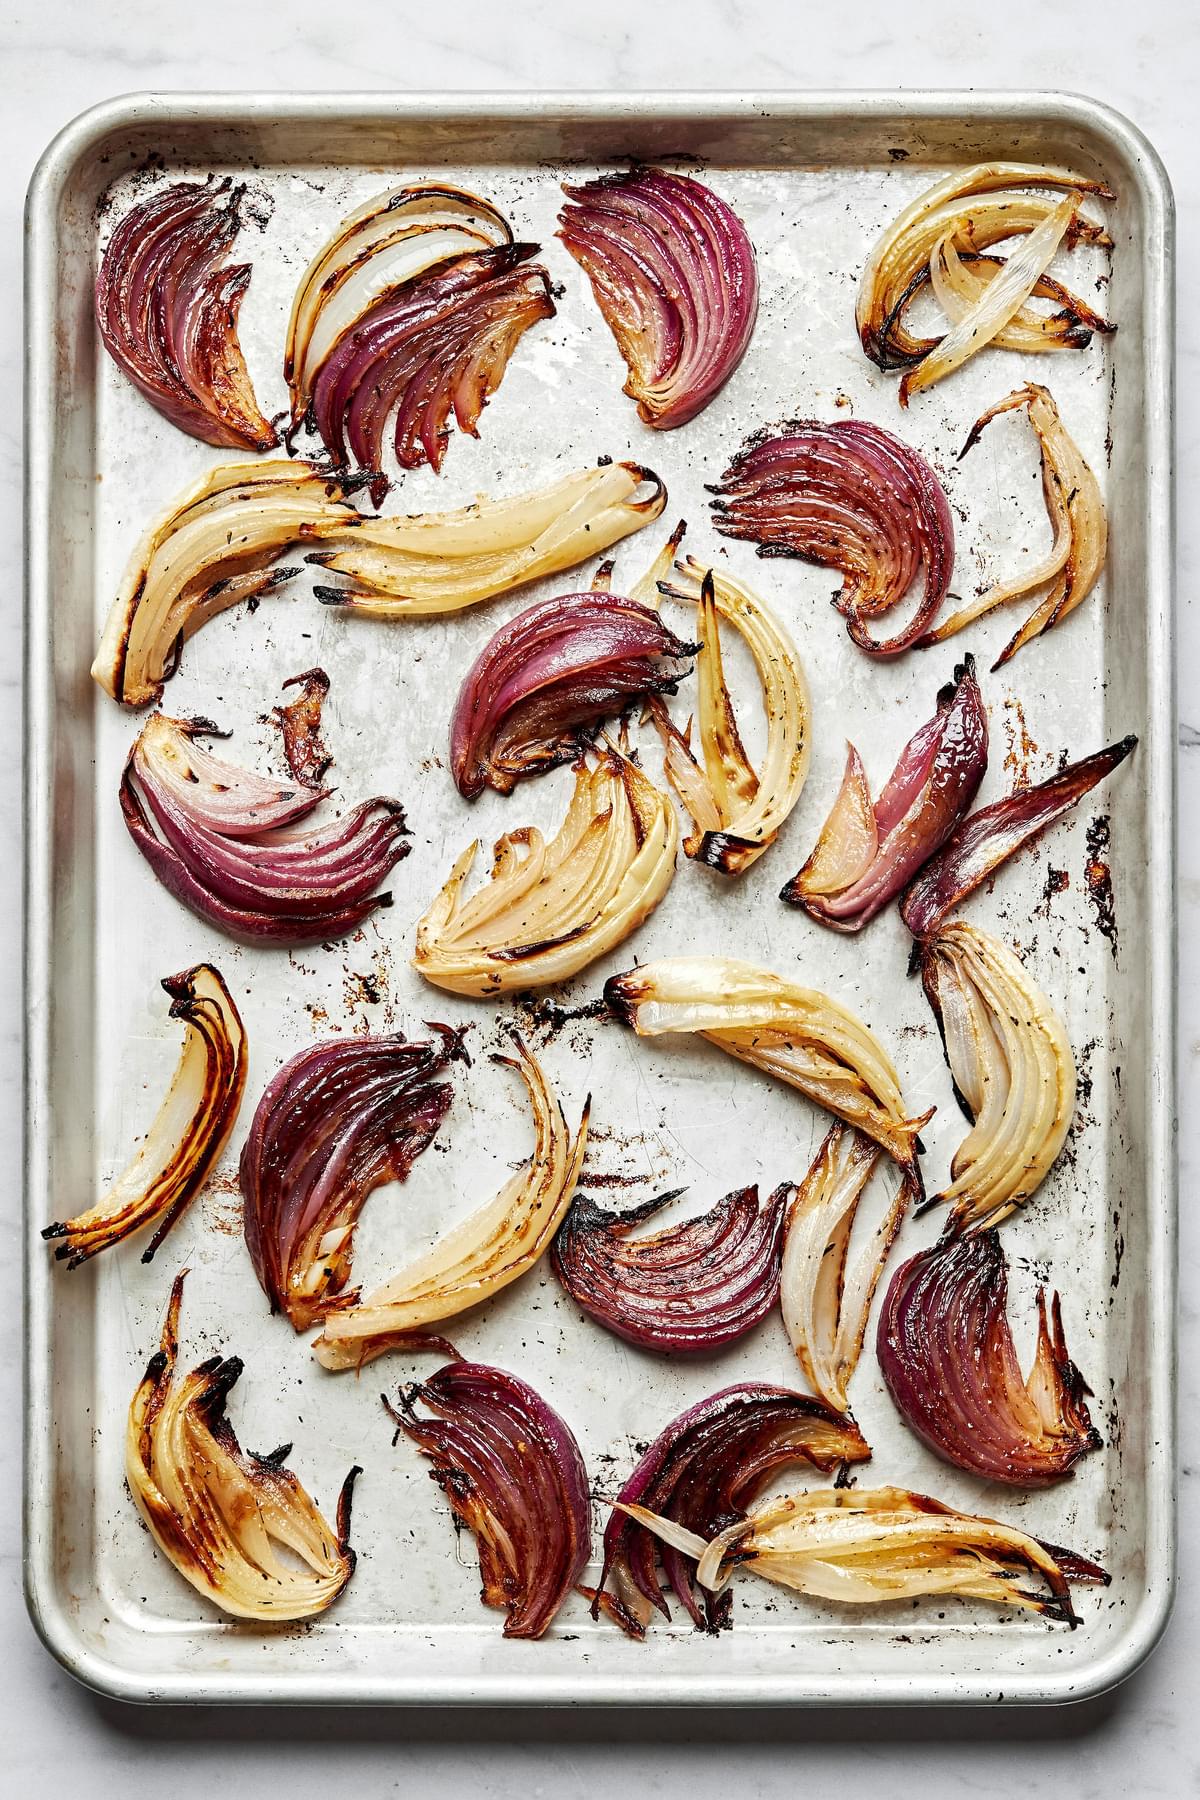 roasted onions on a baking sheet made with olive oil, red wine vinegar, lemon juice, dijon, spices and brown sugar